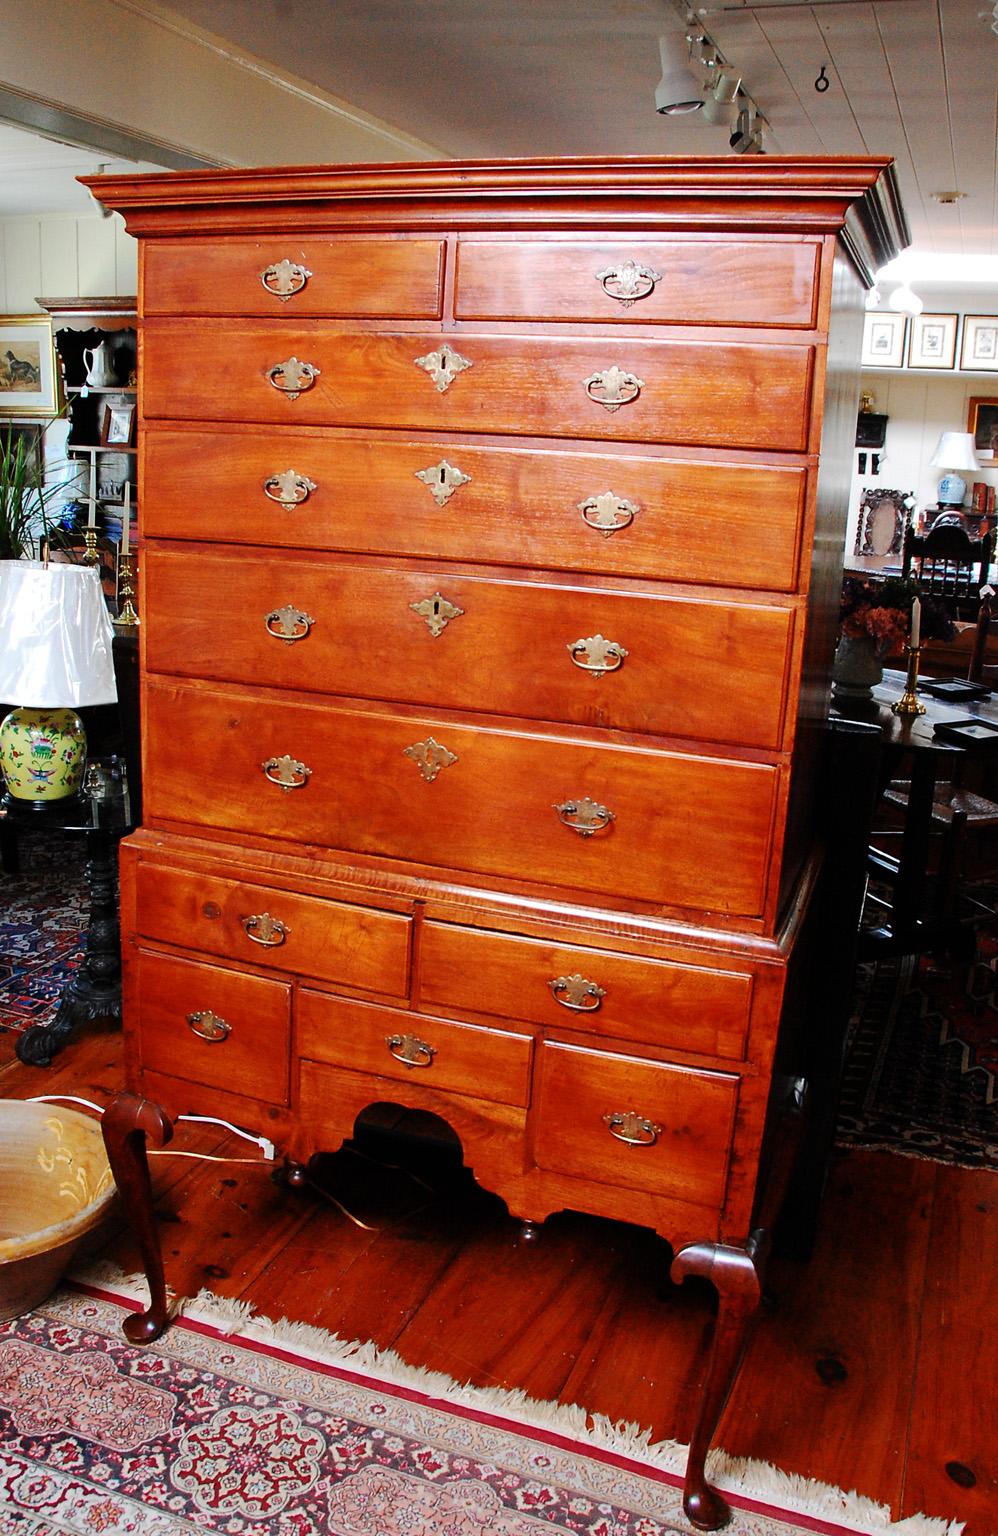 American Queen Anne Massachusetts maple two part highboy with cabriole legs, pad feet, shaped skirt and bold cornice. The molding that holds the upper section in place is in curly maple, a nice contrast to the straight maple in the rest of the